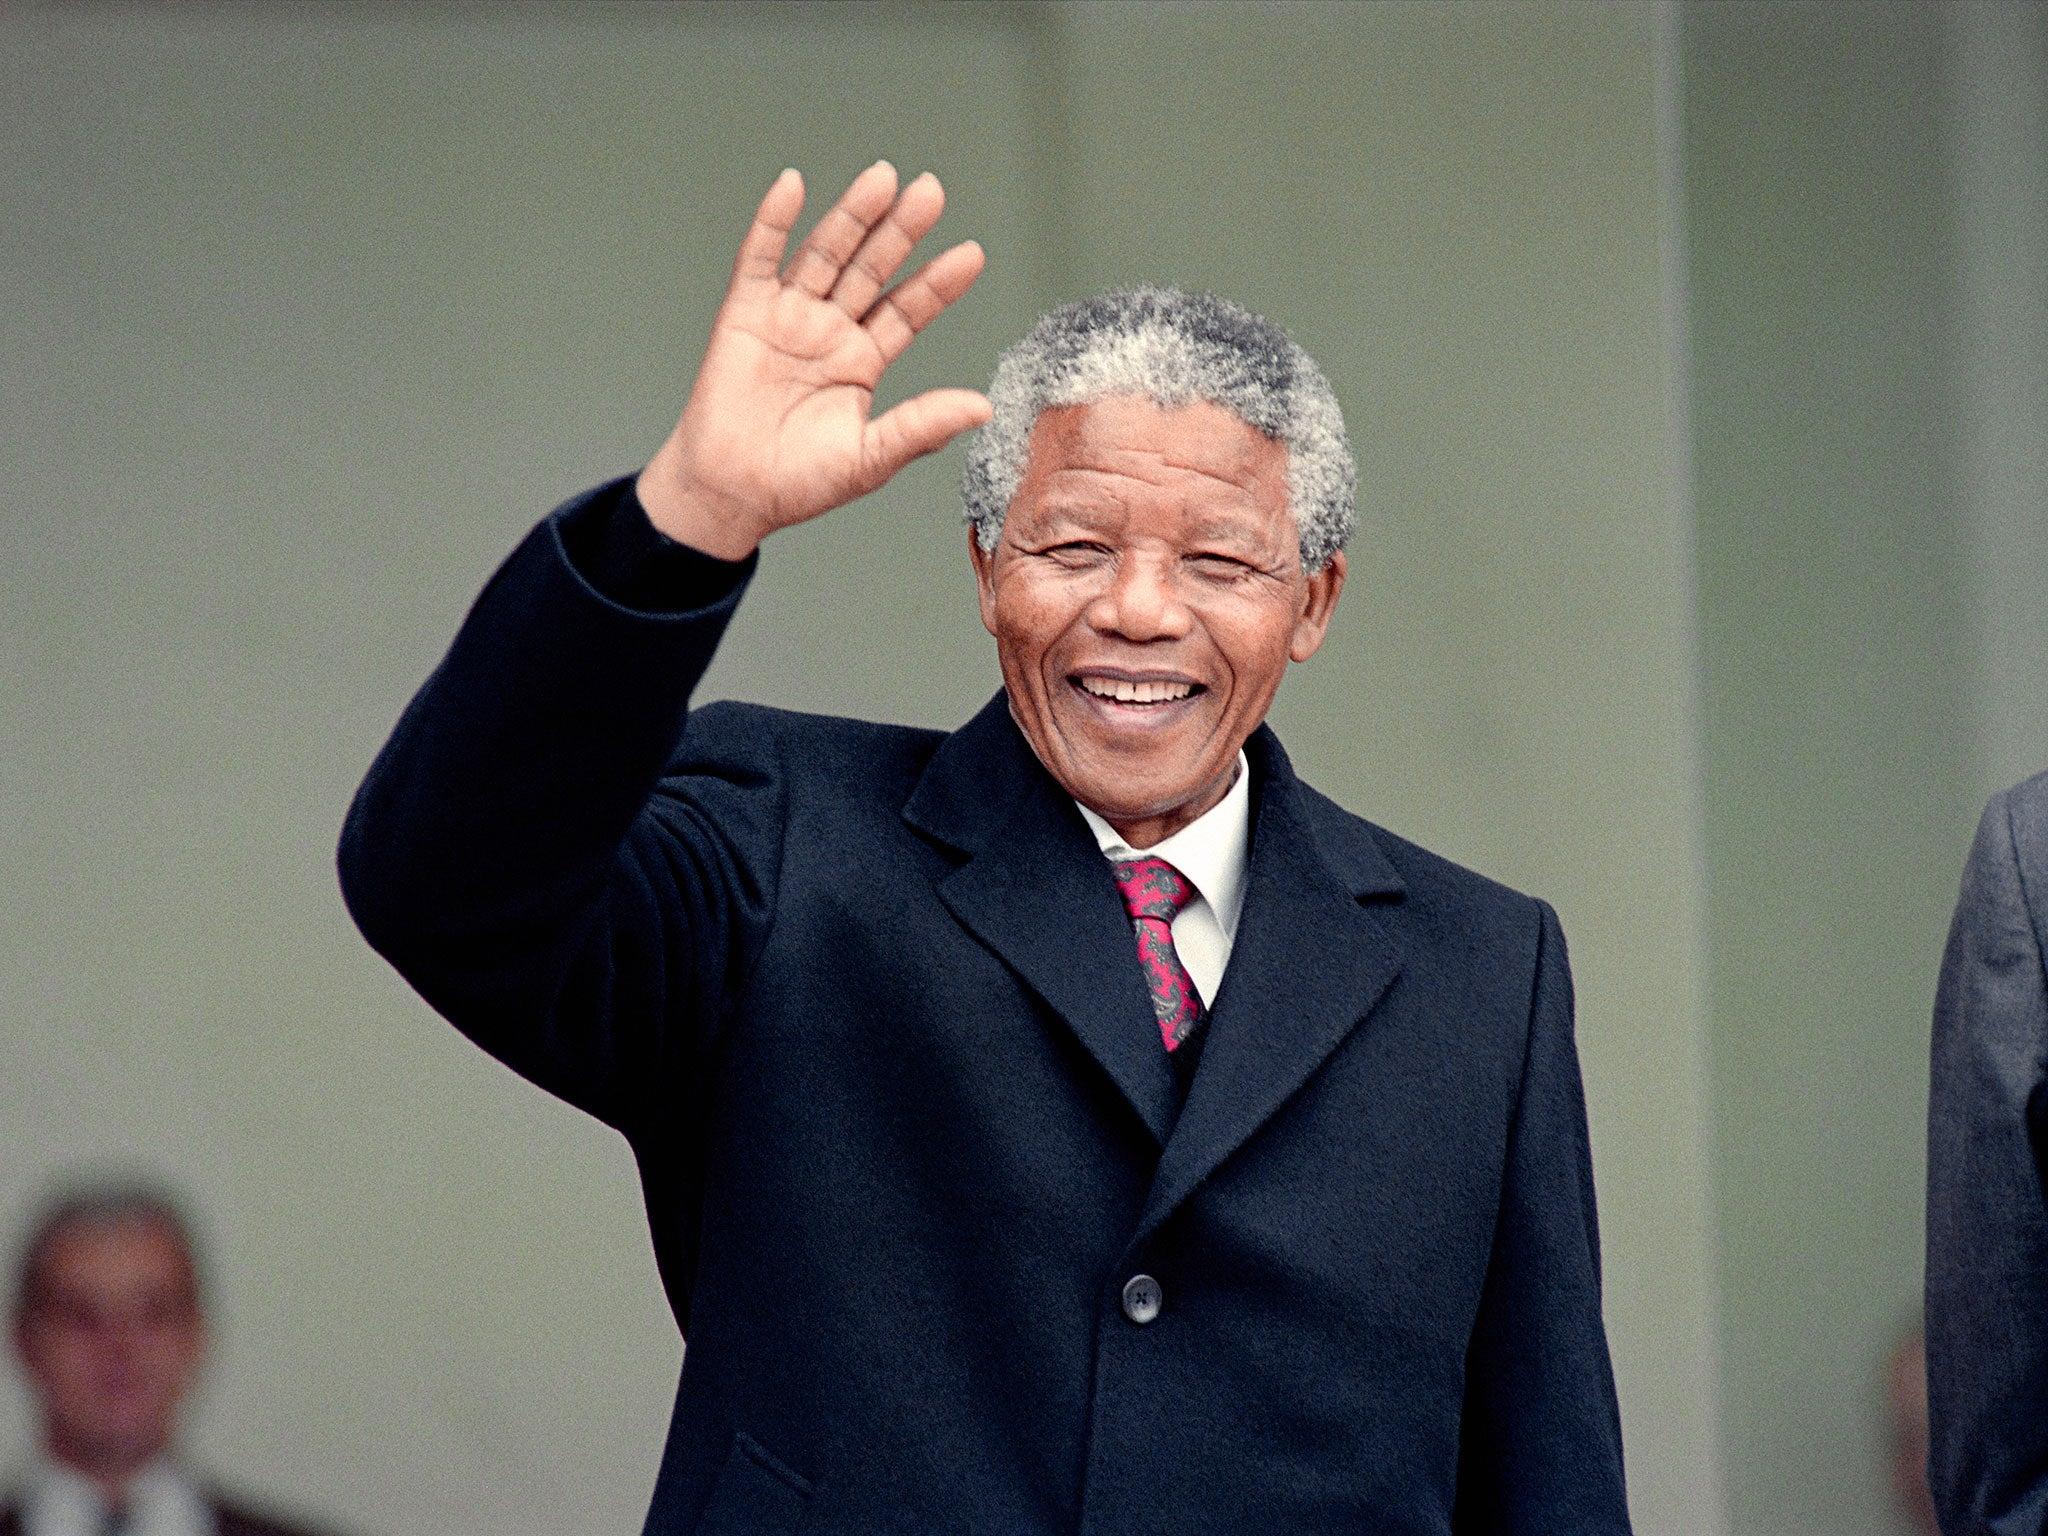 CIA's involvement in arrest of Nelson Mandela is a classic example